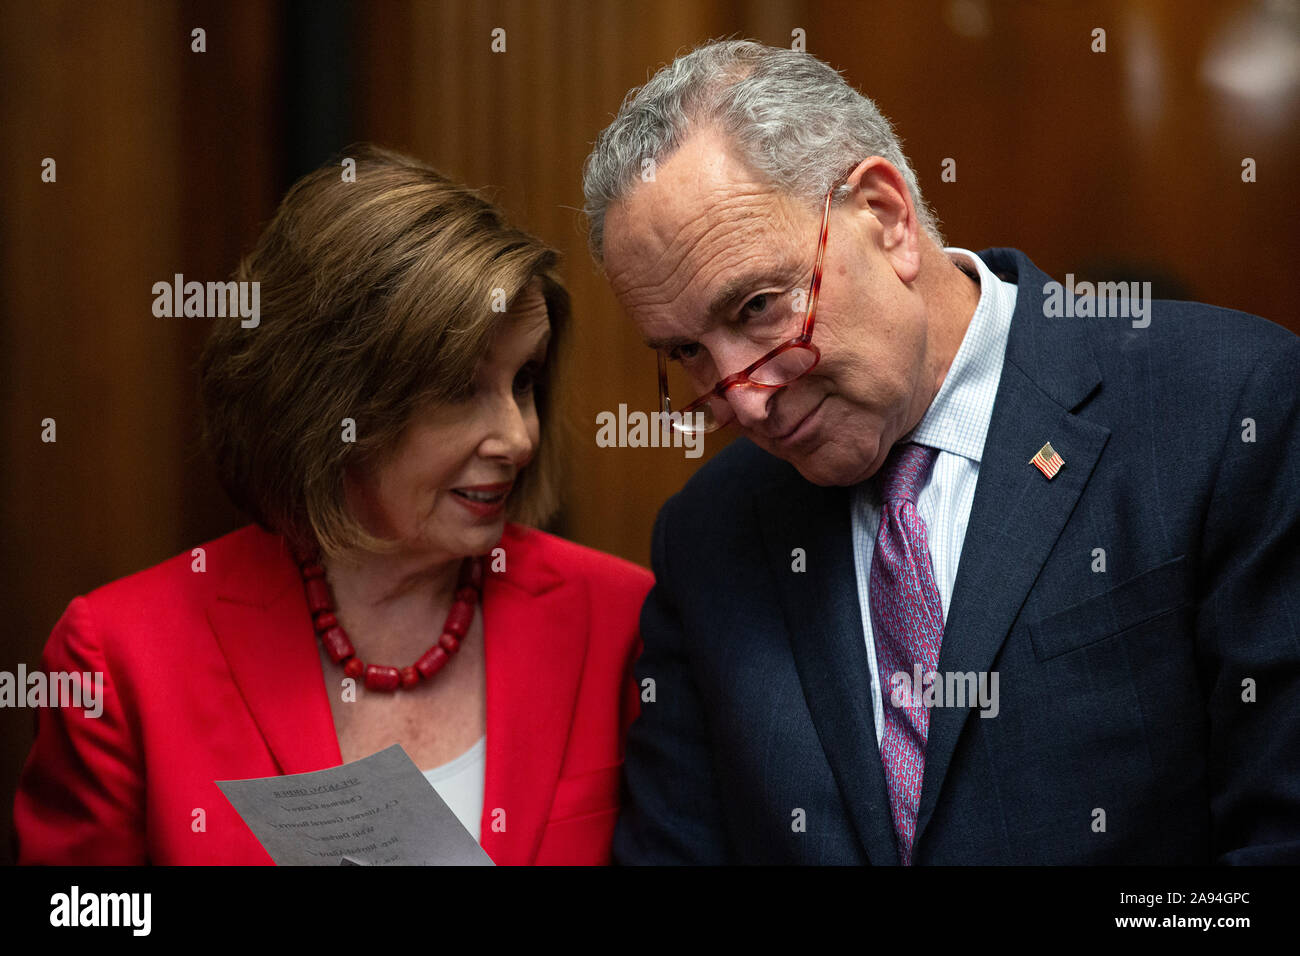 Speaker of the United States House of Representatives Nancy Pelosi (Democrat of California) and United States Senate Minority Leader Chuck Schumer (Democrat of New York) speak to each other during a press conference on the Deferred Action for Childhood Arrivals program on Capitol Hill in Washington, DC, U.S. on Tuesday, November 12, 2019. The Supreme Court is currently hearing a case that will determine the legality and future of the DACA program. Credit: Stefani Reynolds/CNP /MediaPunch Stock Photo